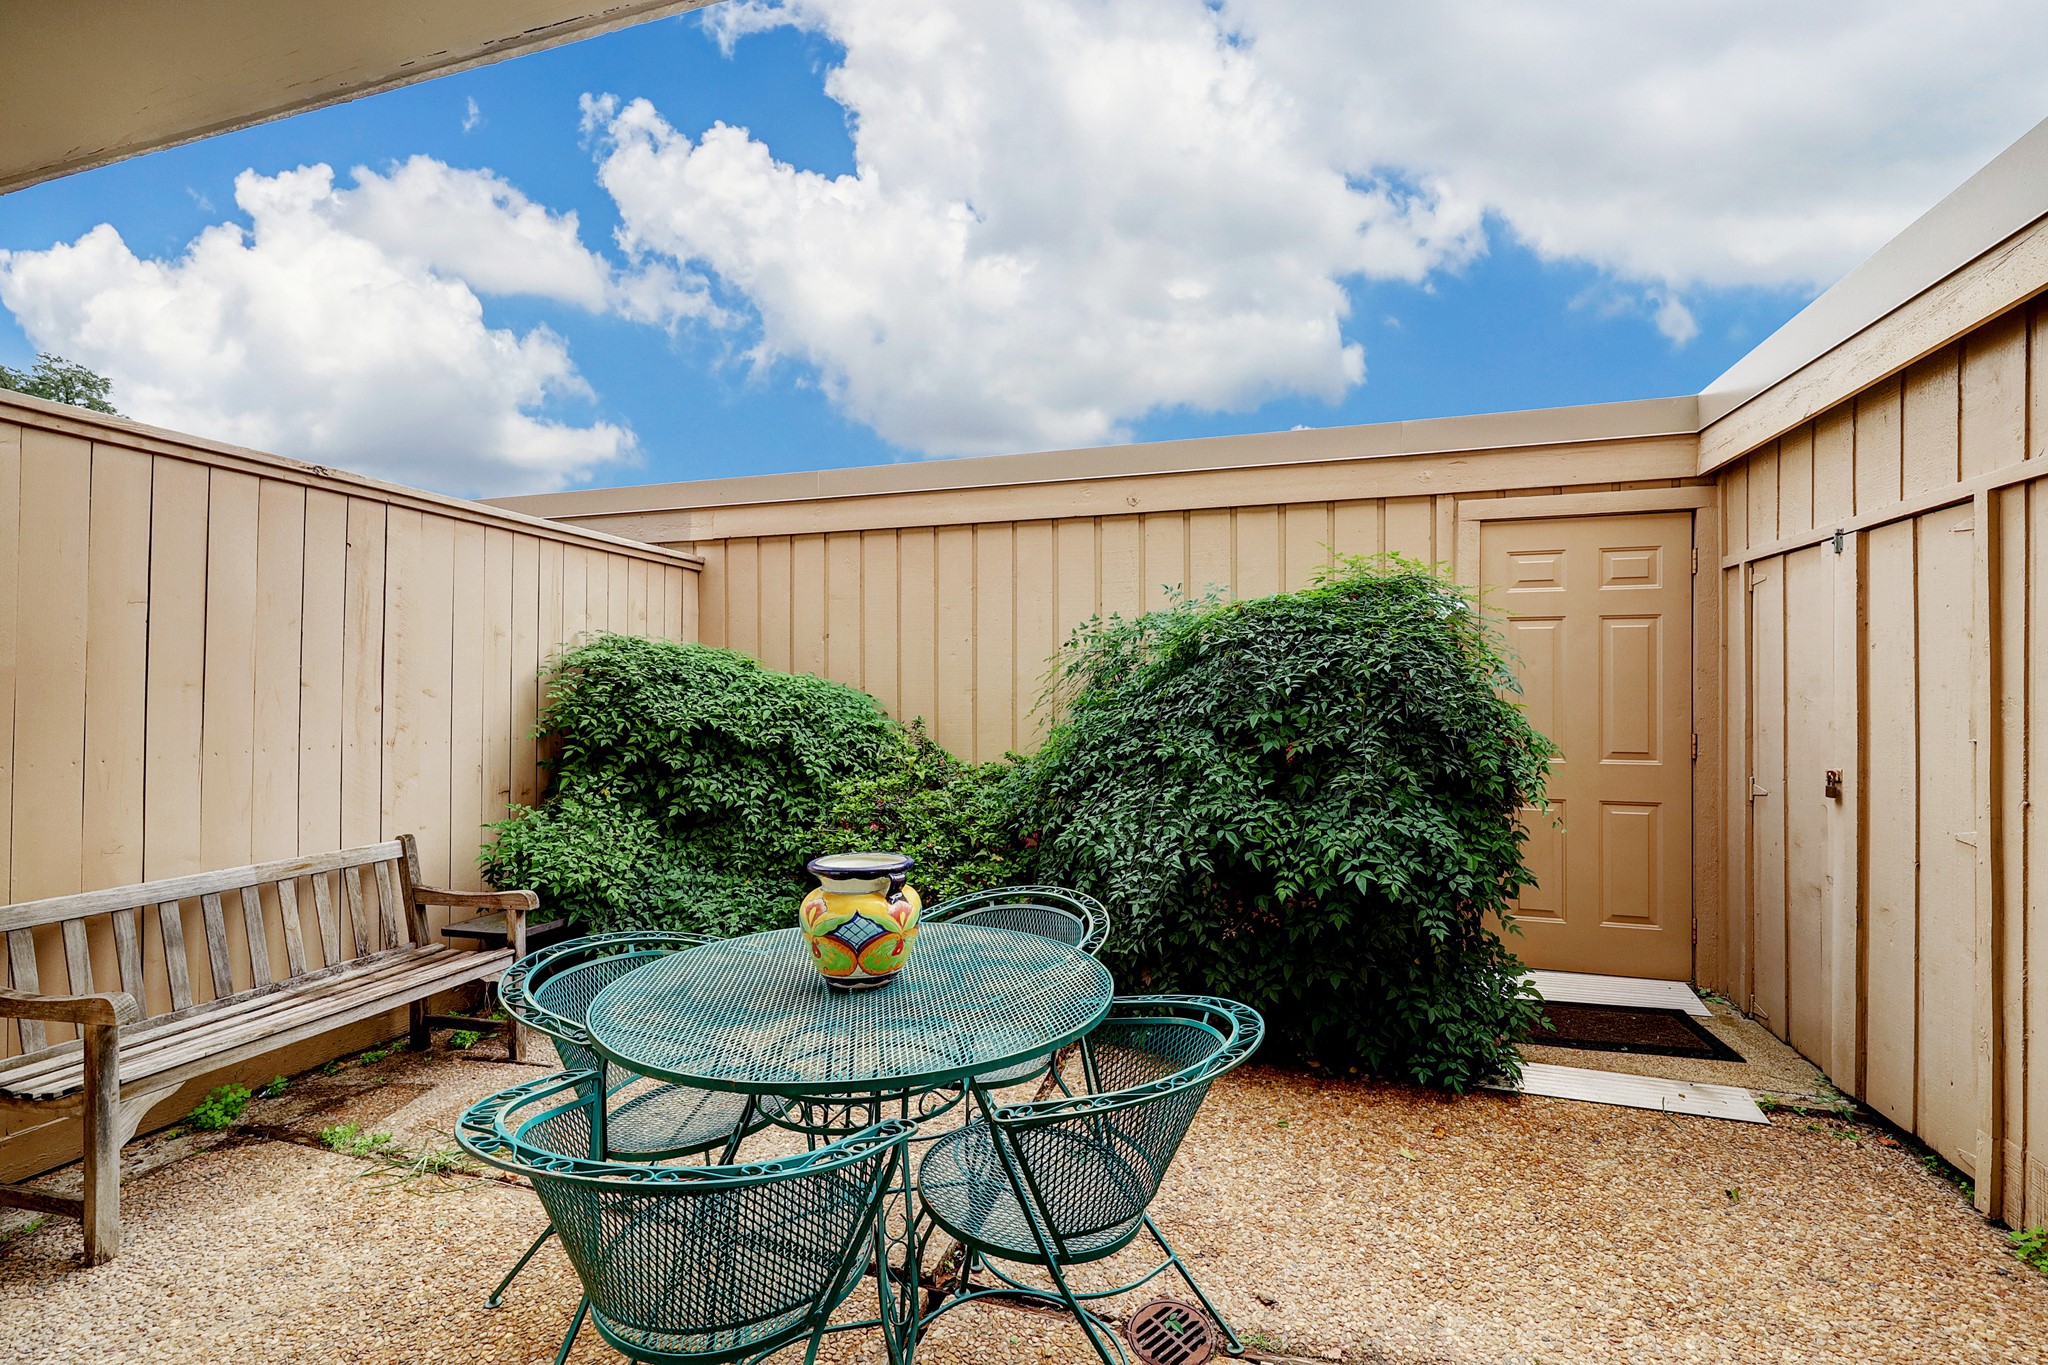 The backyard patio is a great place to wind down in the evening or have a cup of coffee in the morning! Through the door is the detached 2 car garage.